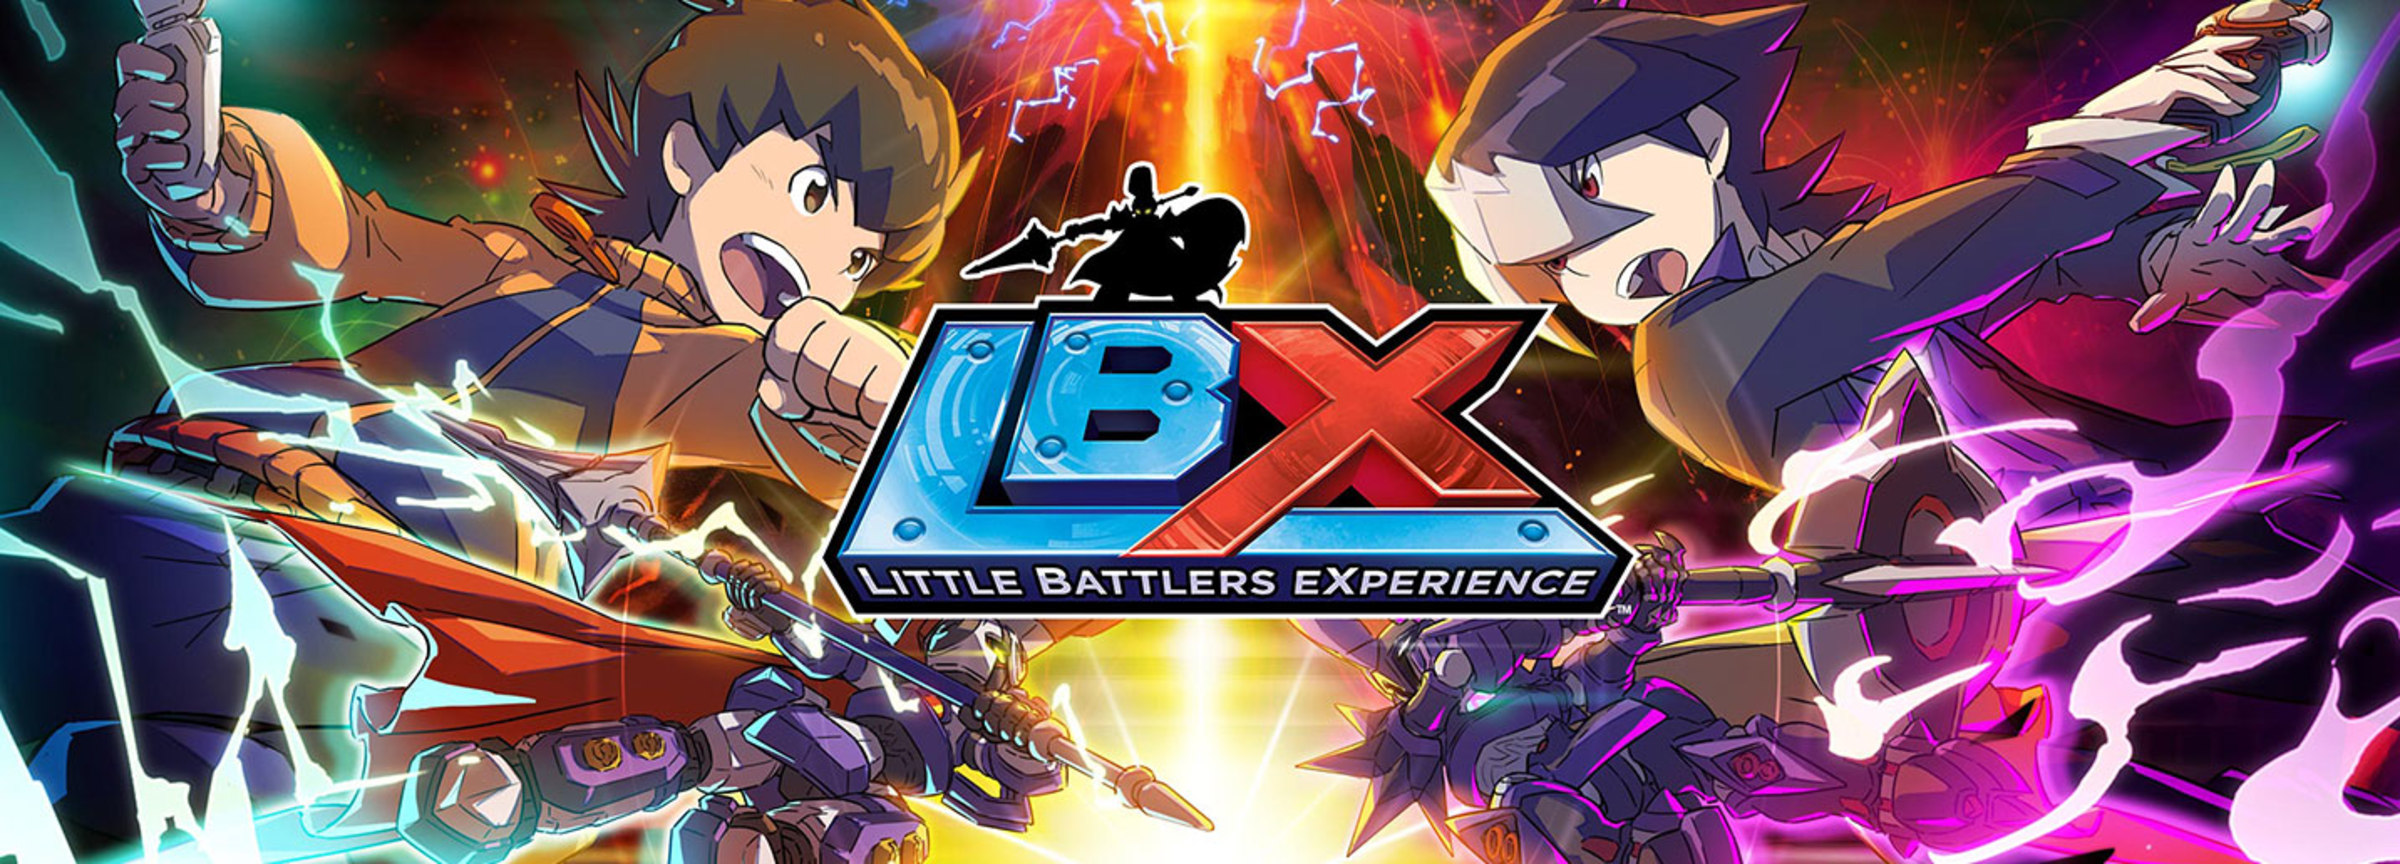 Little Battlers eXperience for Nintendo 3DS - Nintendo Official Site